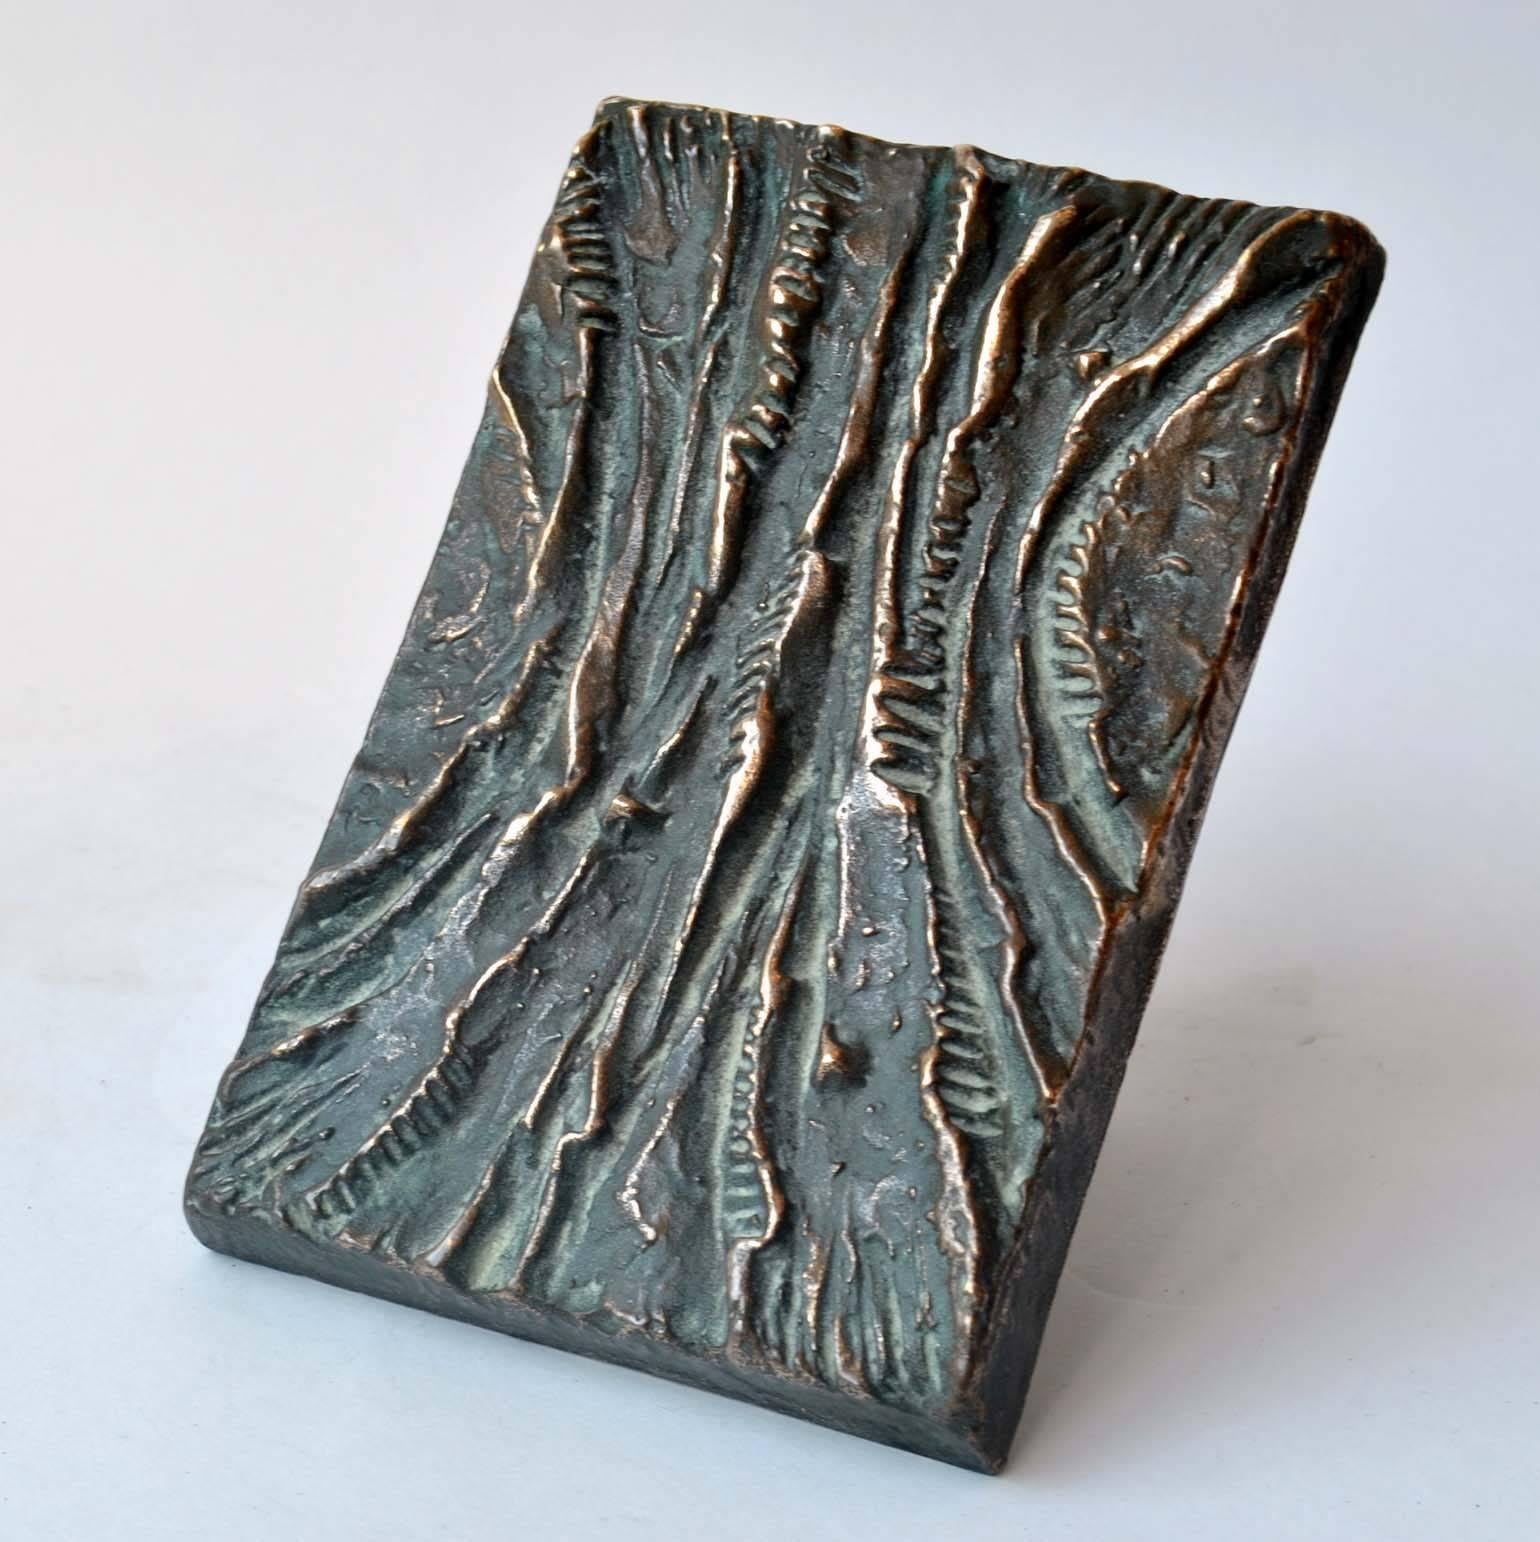 Rectangular bronze cast door handle with a textural relief in vertical curves and dark patina, suitable for push and pull doors.
The handle brackets are attached to the main plate by two fixings, they can be positioned in two ways, inwards outwards.